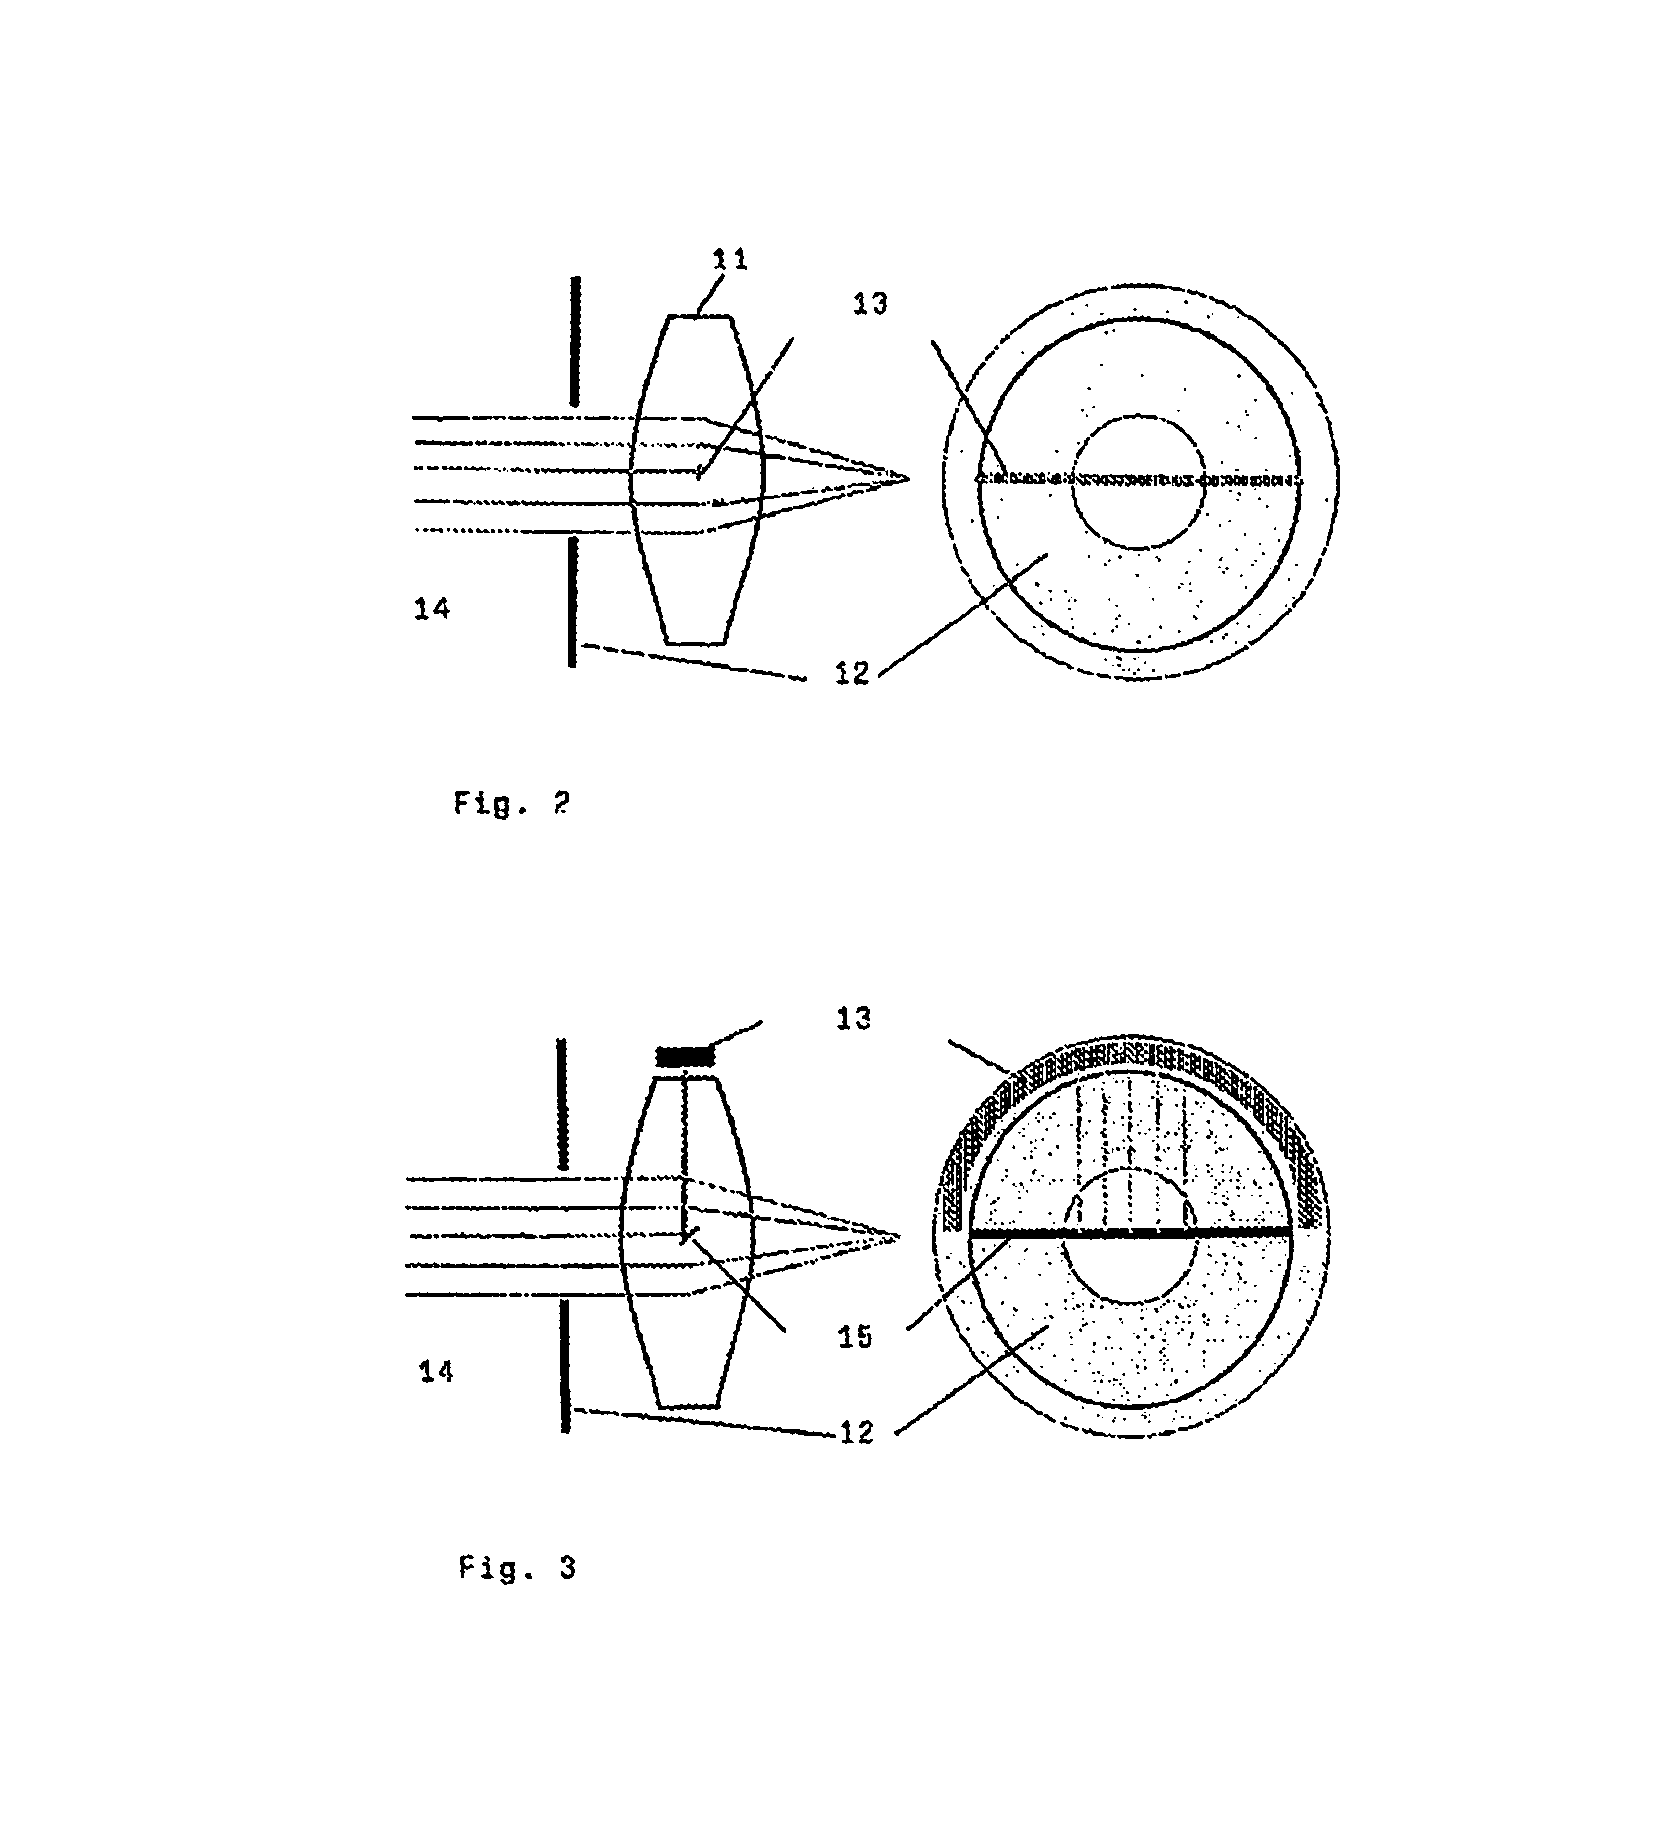 Implantable system for determining the accommodation requirement by optical measurement of the pupil diameter and the surrounding luminance